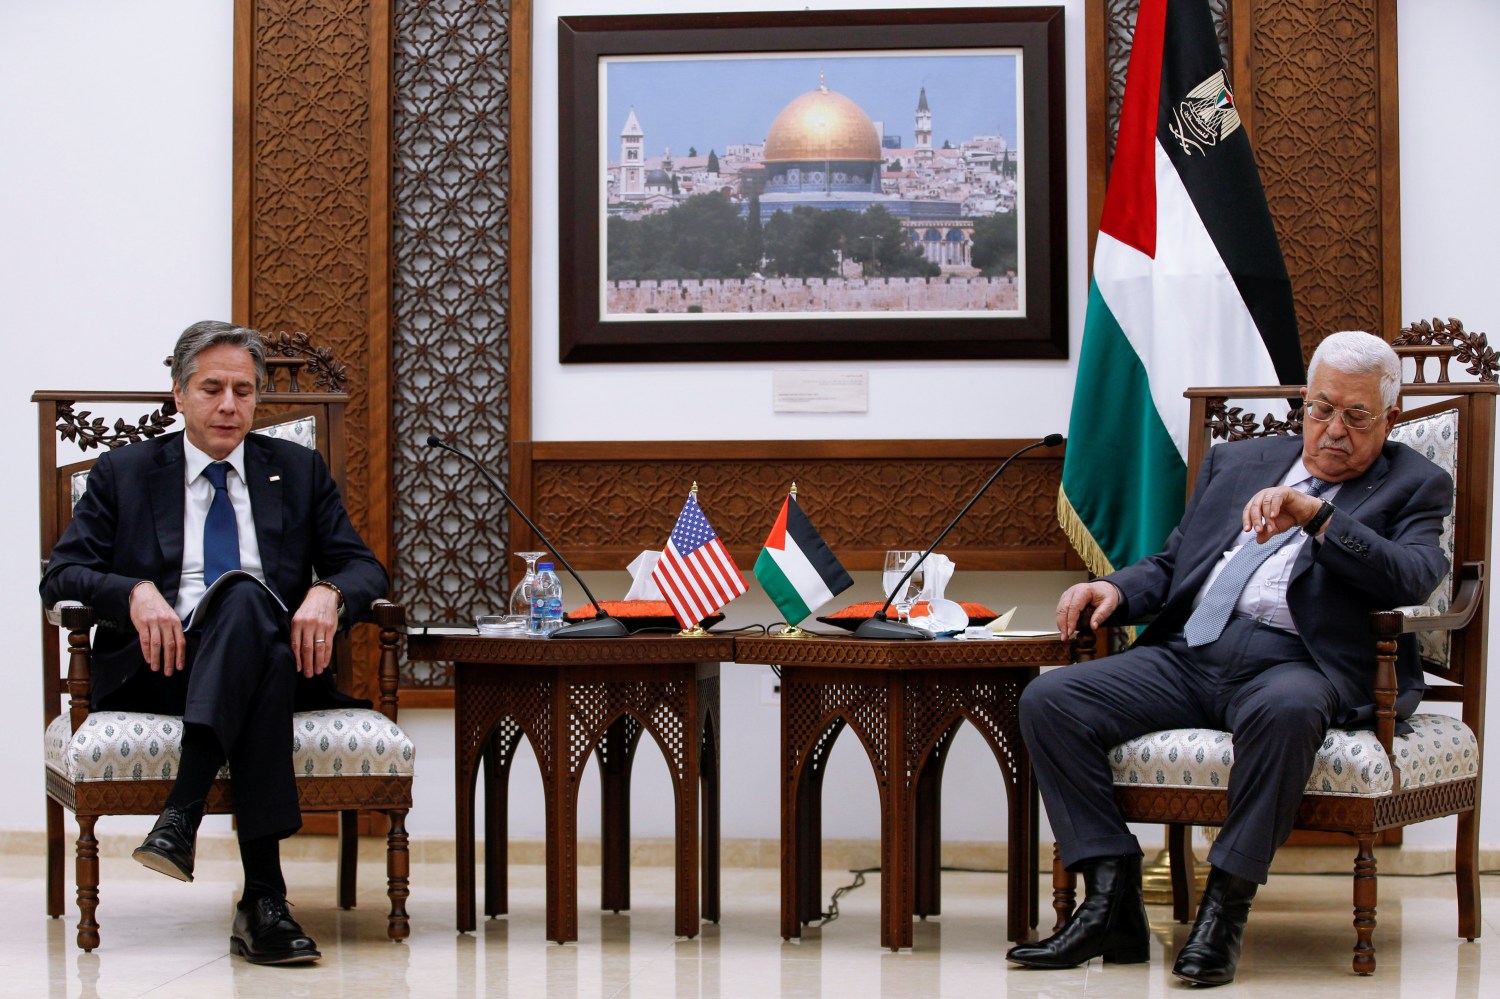 U.S. Secretary of State Antony Blinken meets with Palestinian President Mahmoud Abbas, in the West Bank city of Ramallah, May 25, 2021. Majdi Mohammed/Pool via REUTERS